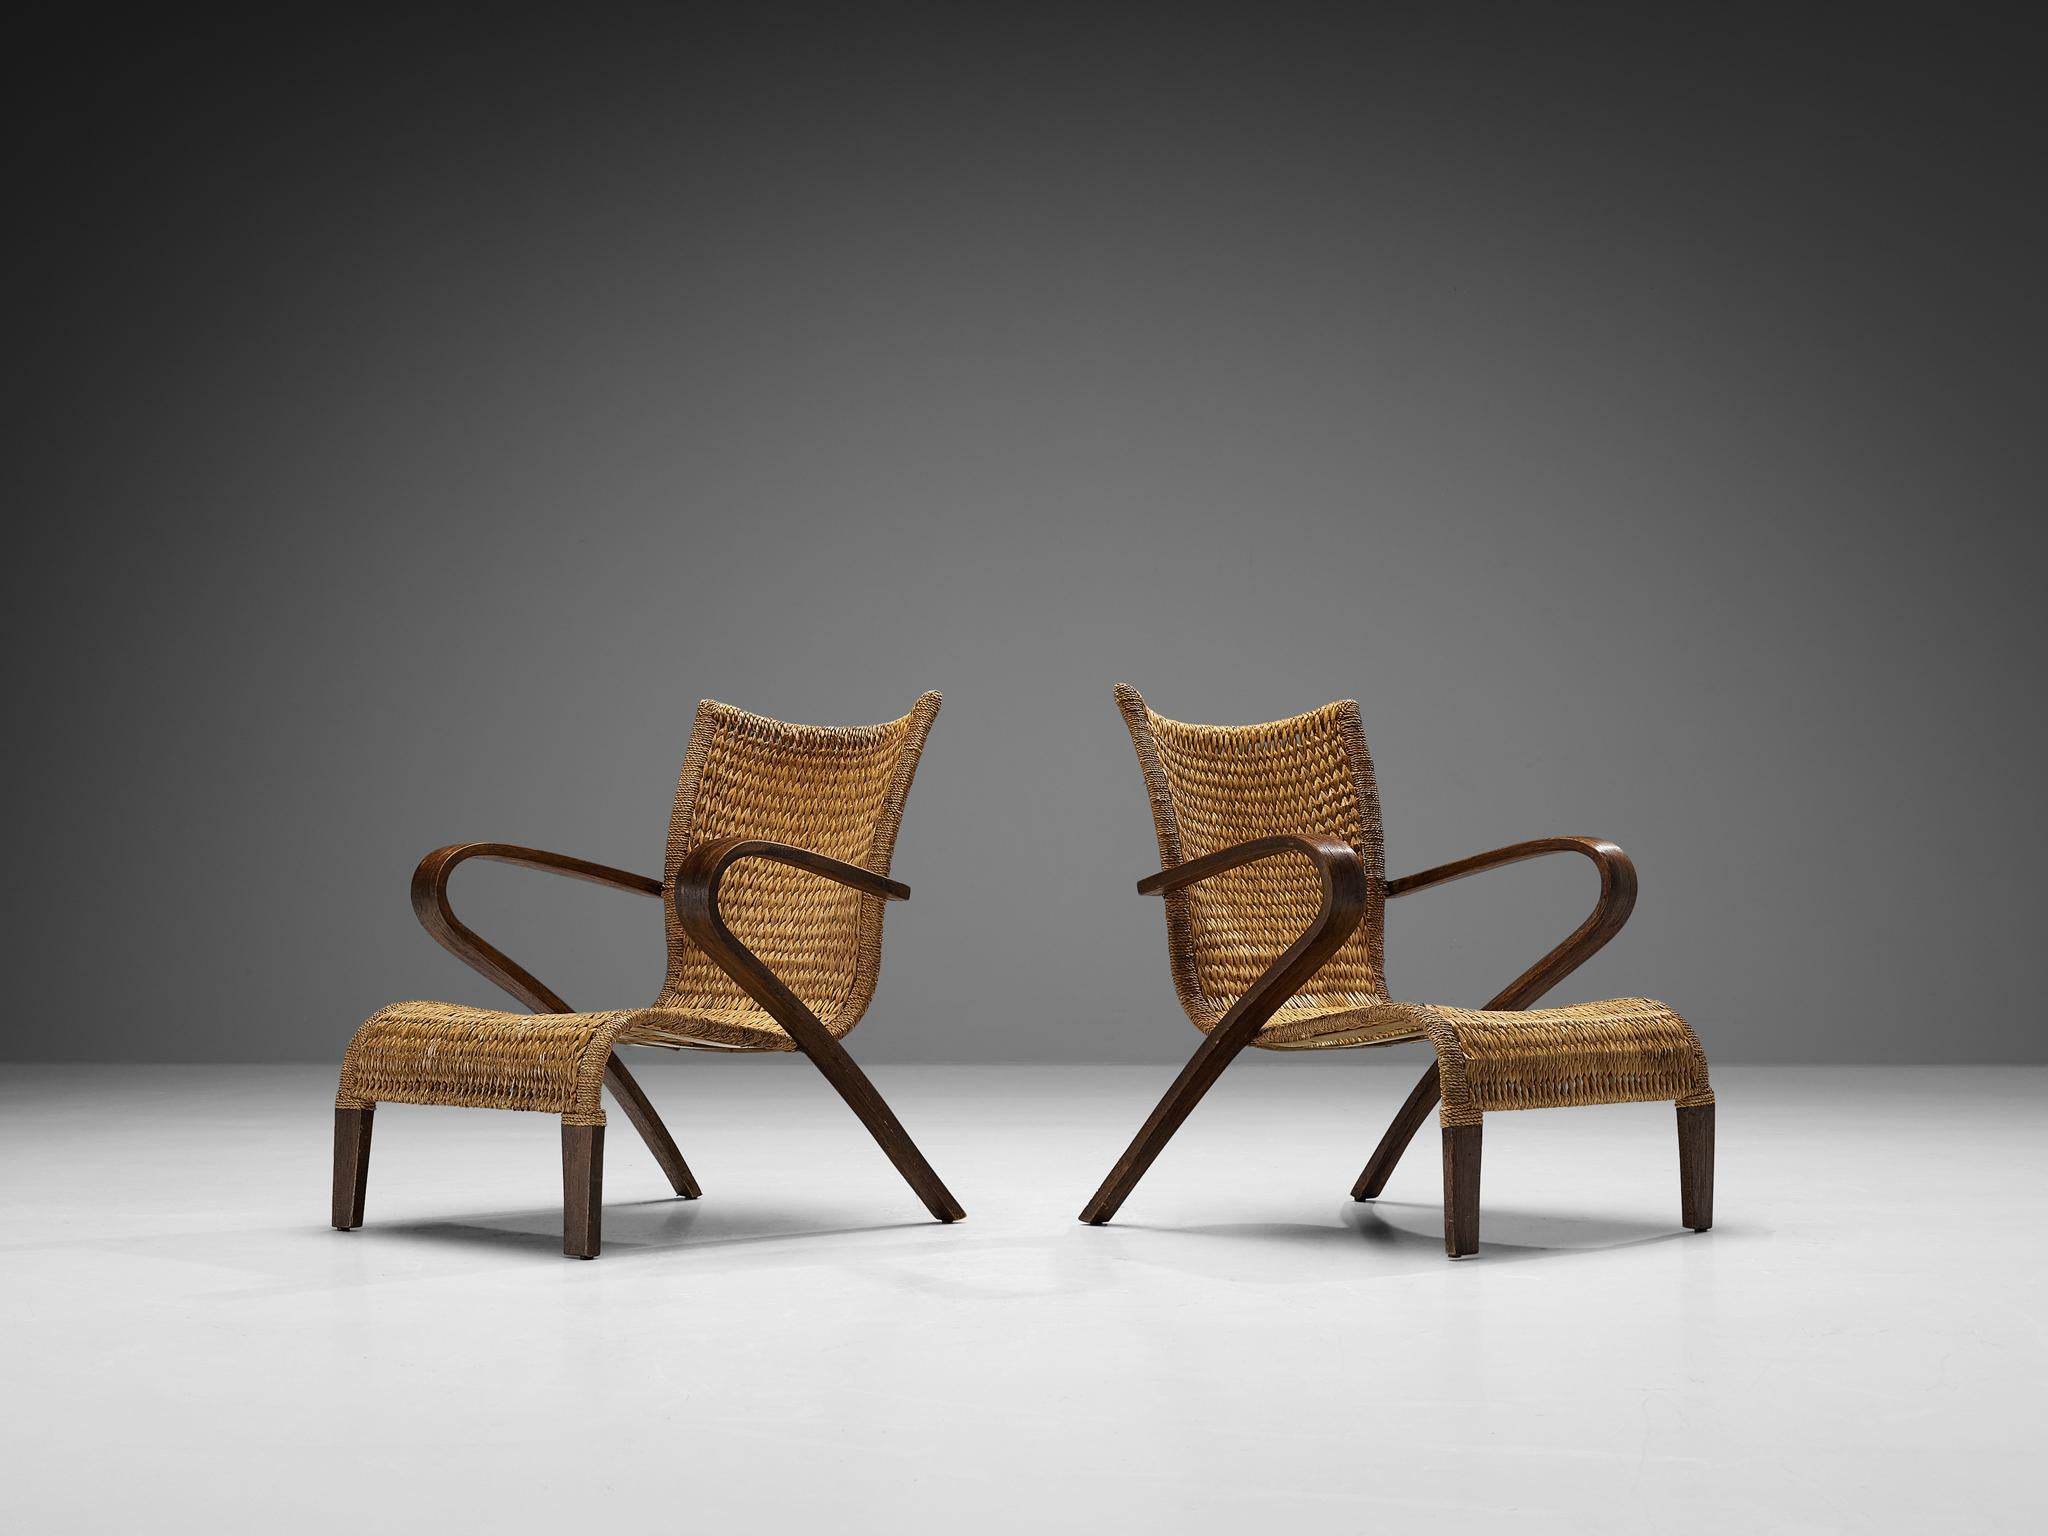 Charming Pair of Rustic French Lounge Chairs